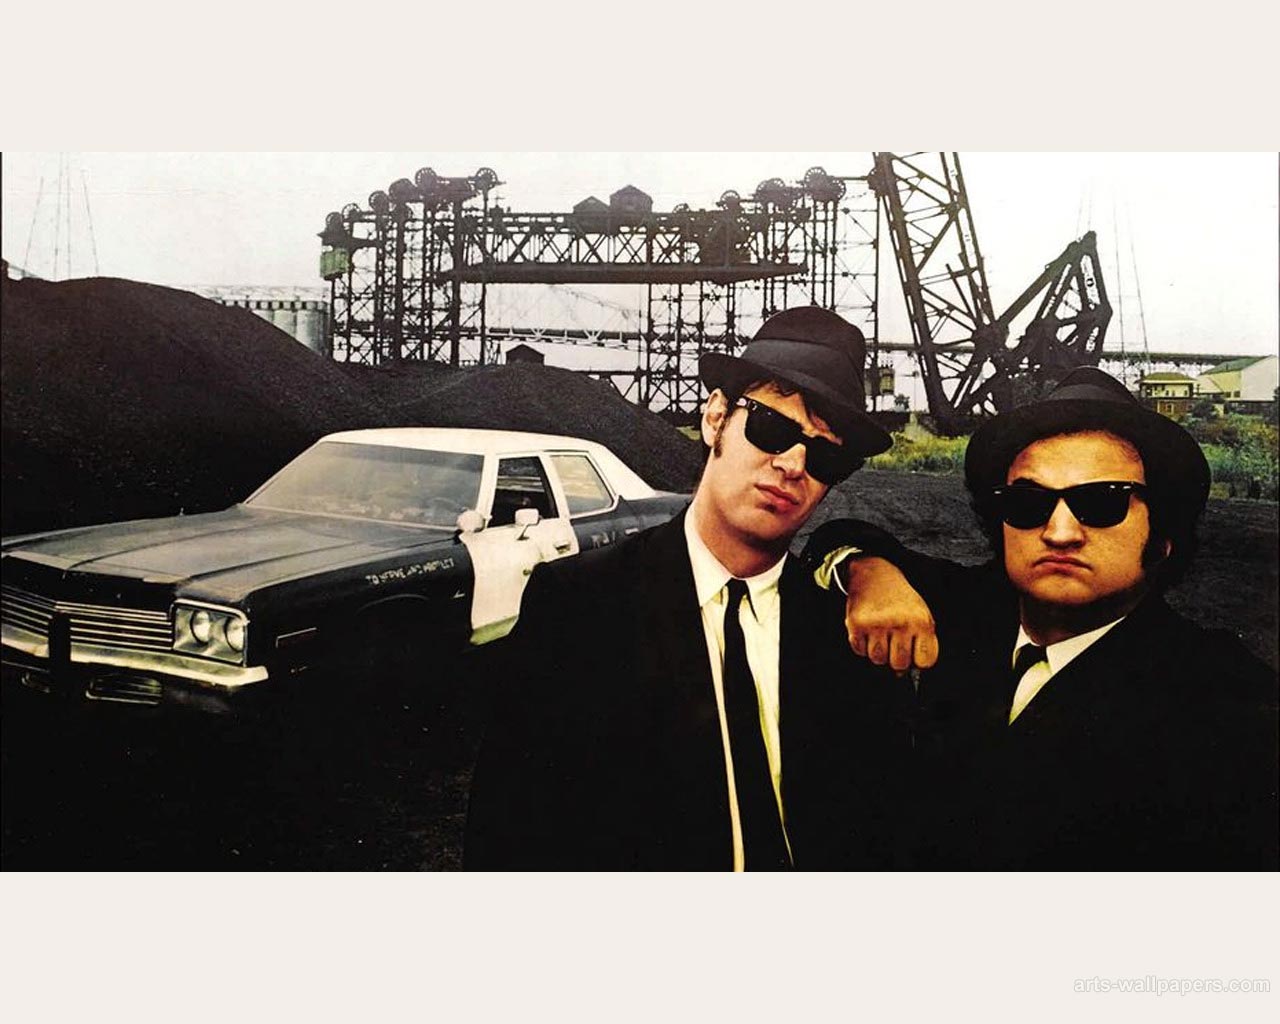 Wallpapers Blues Brothers 1280x1024 #blues brothers